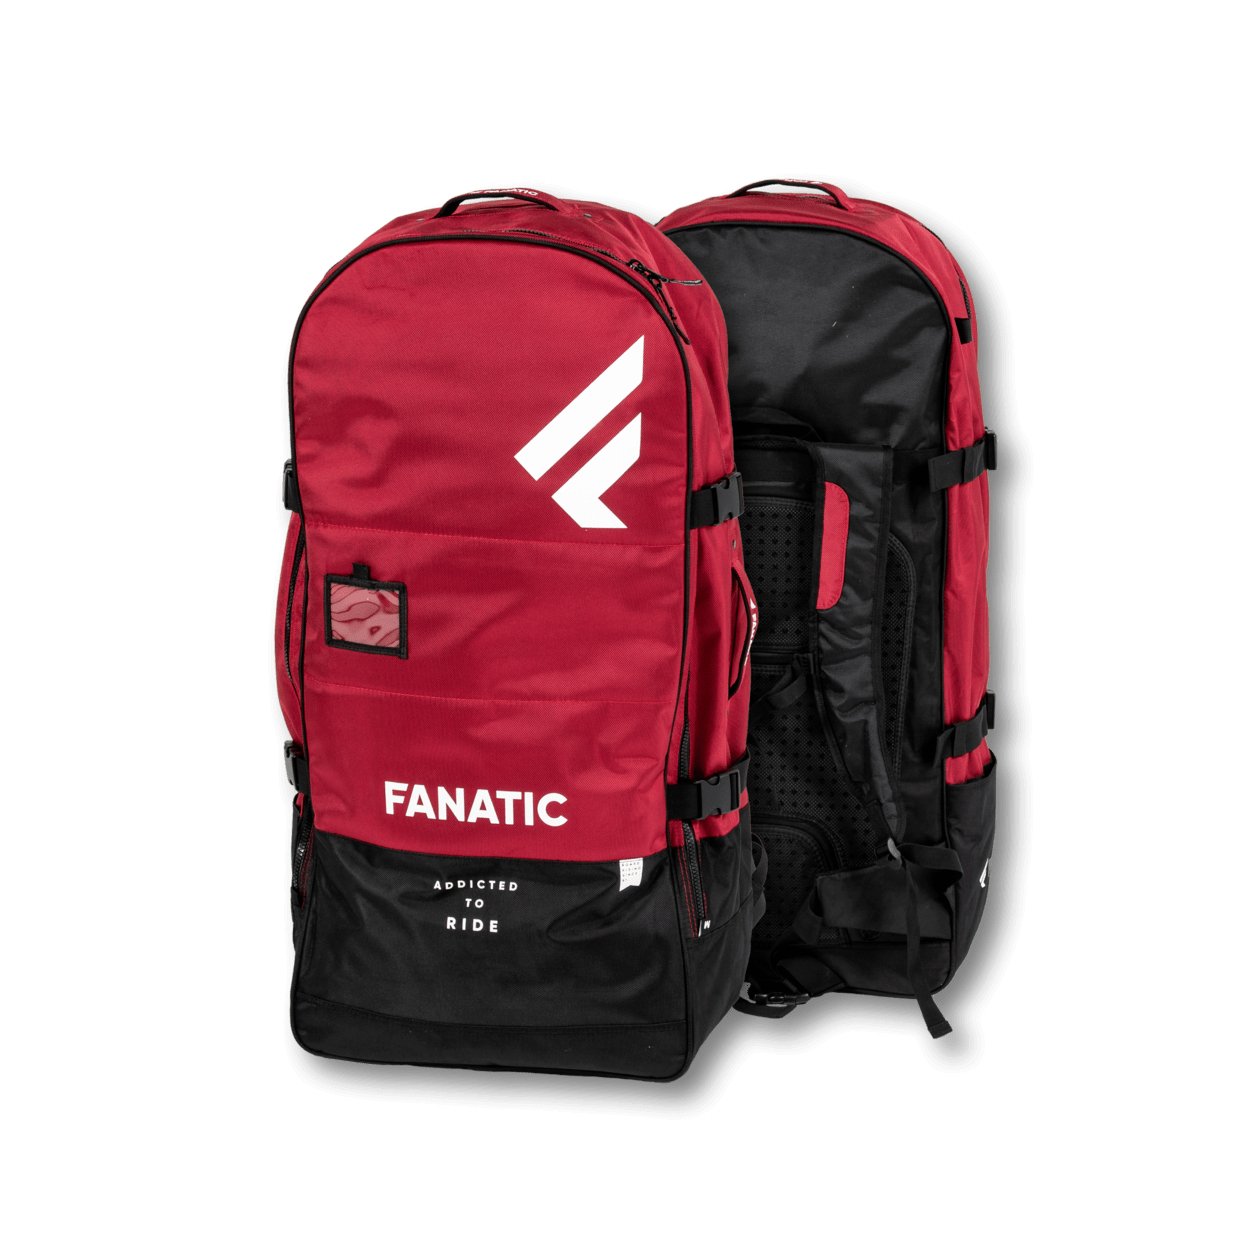 Fanatic Gearbag Pure iSUP 2024 - Worthing Watersports - 9008415928033 - Spareparts - Fanatic SUP